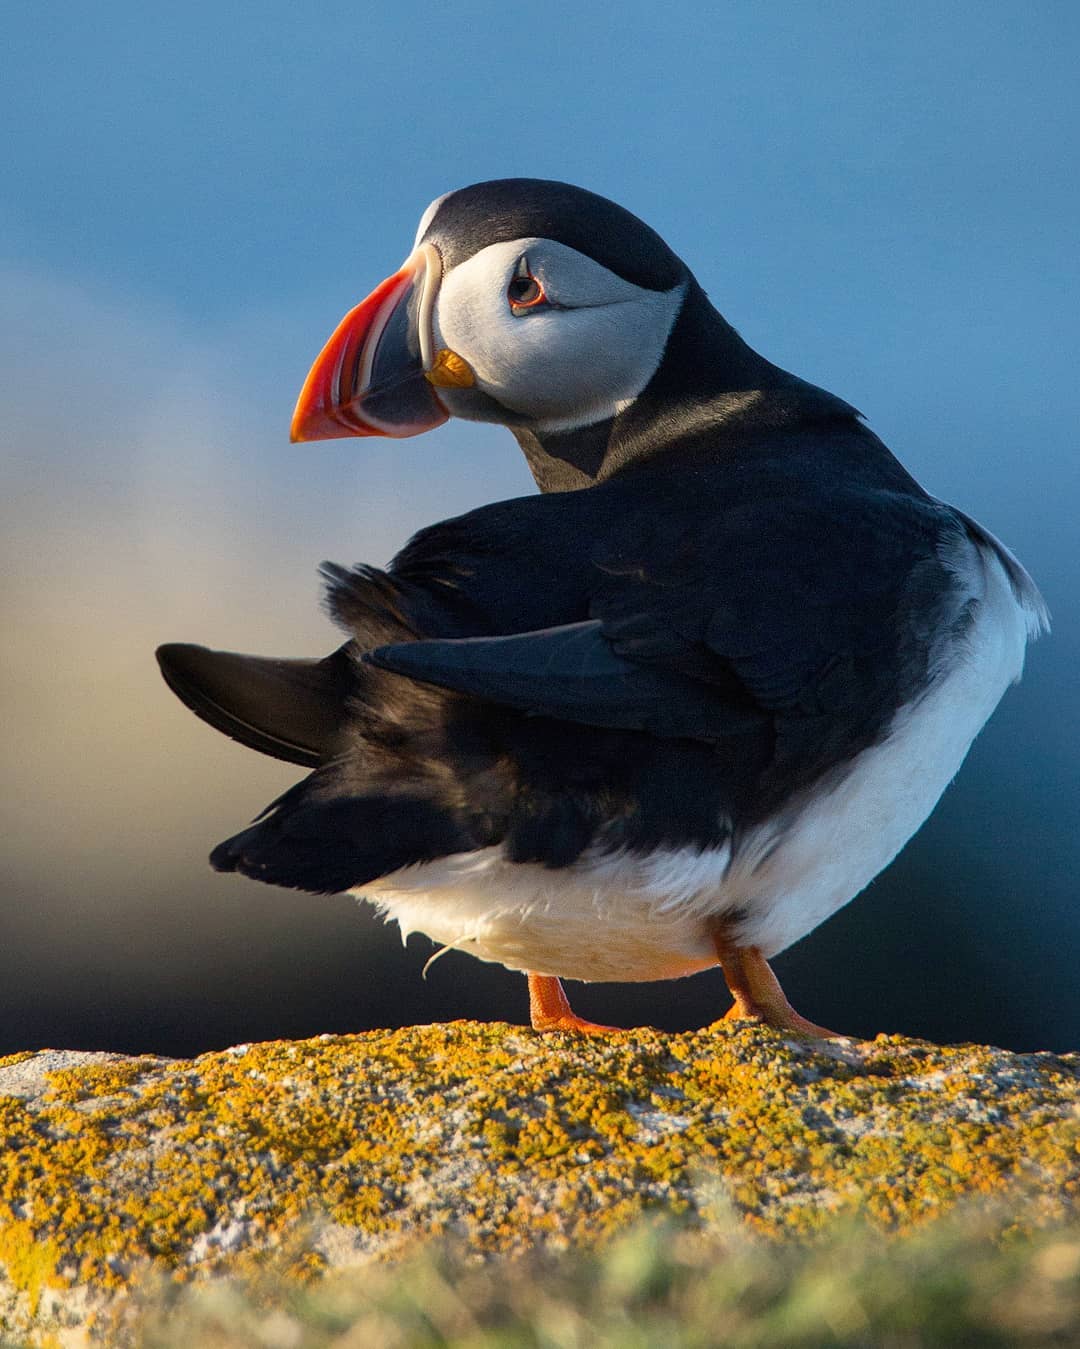 You can go observe the endearing Atlantic puffin, but time may be